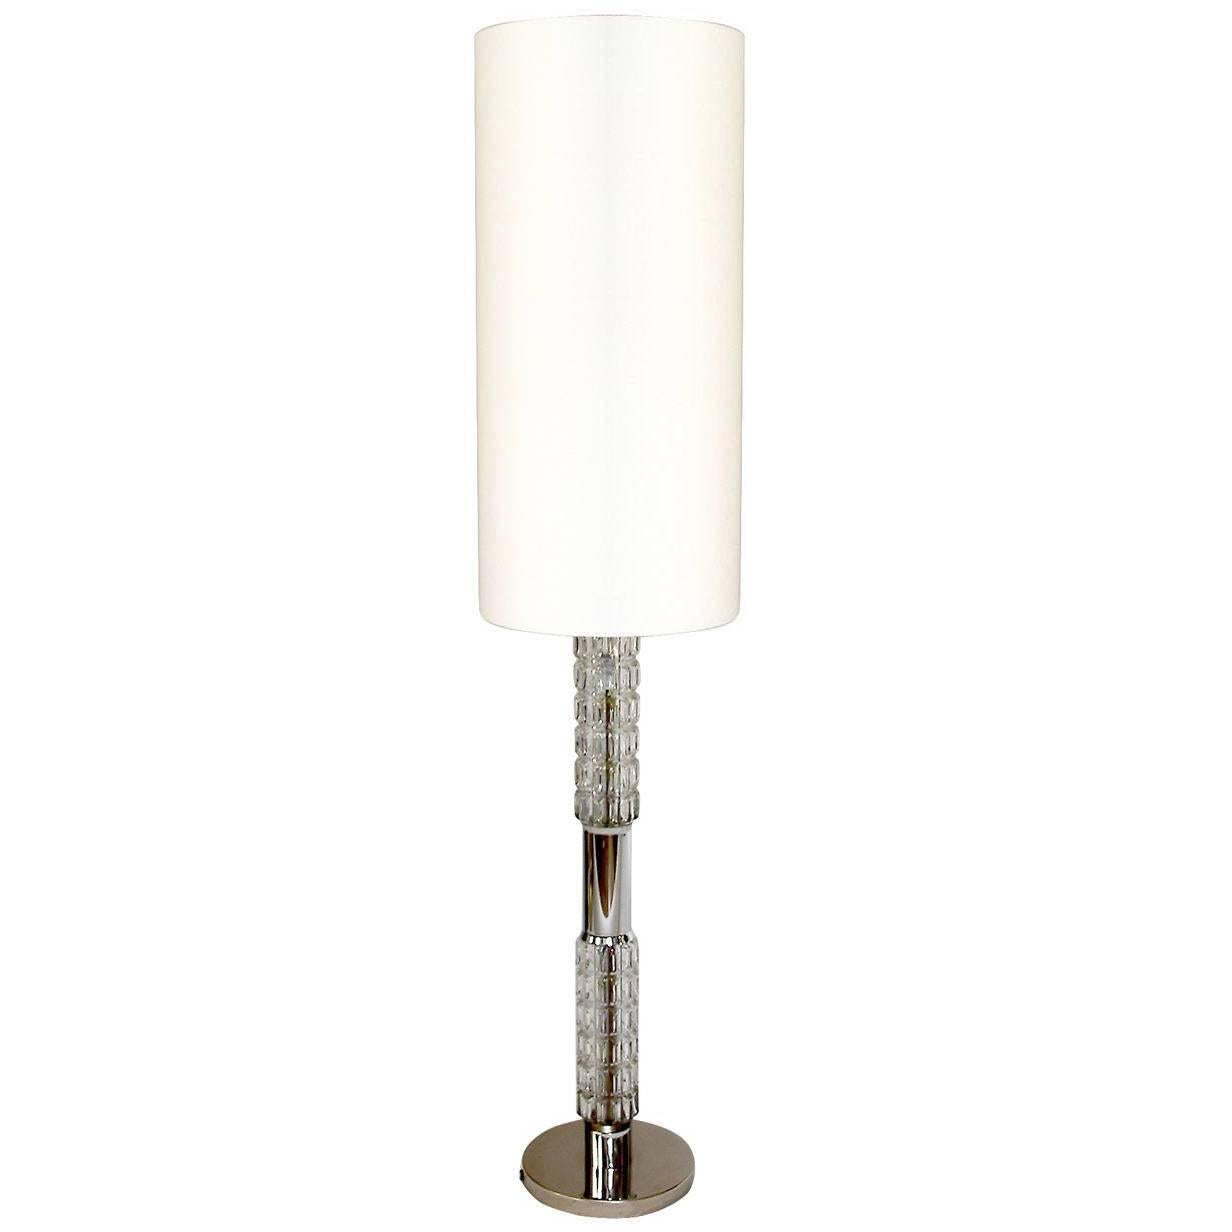 Richard Essig Floor or Table Lamp with Illuminated Glass Stand, 1970s For Sale